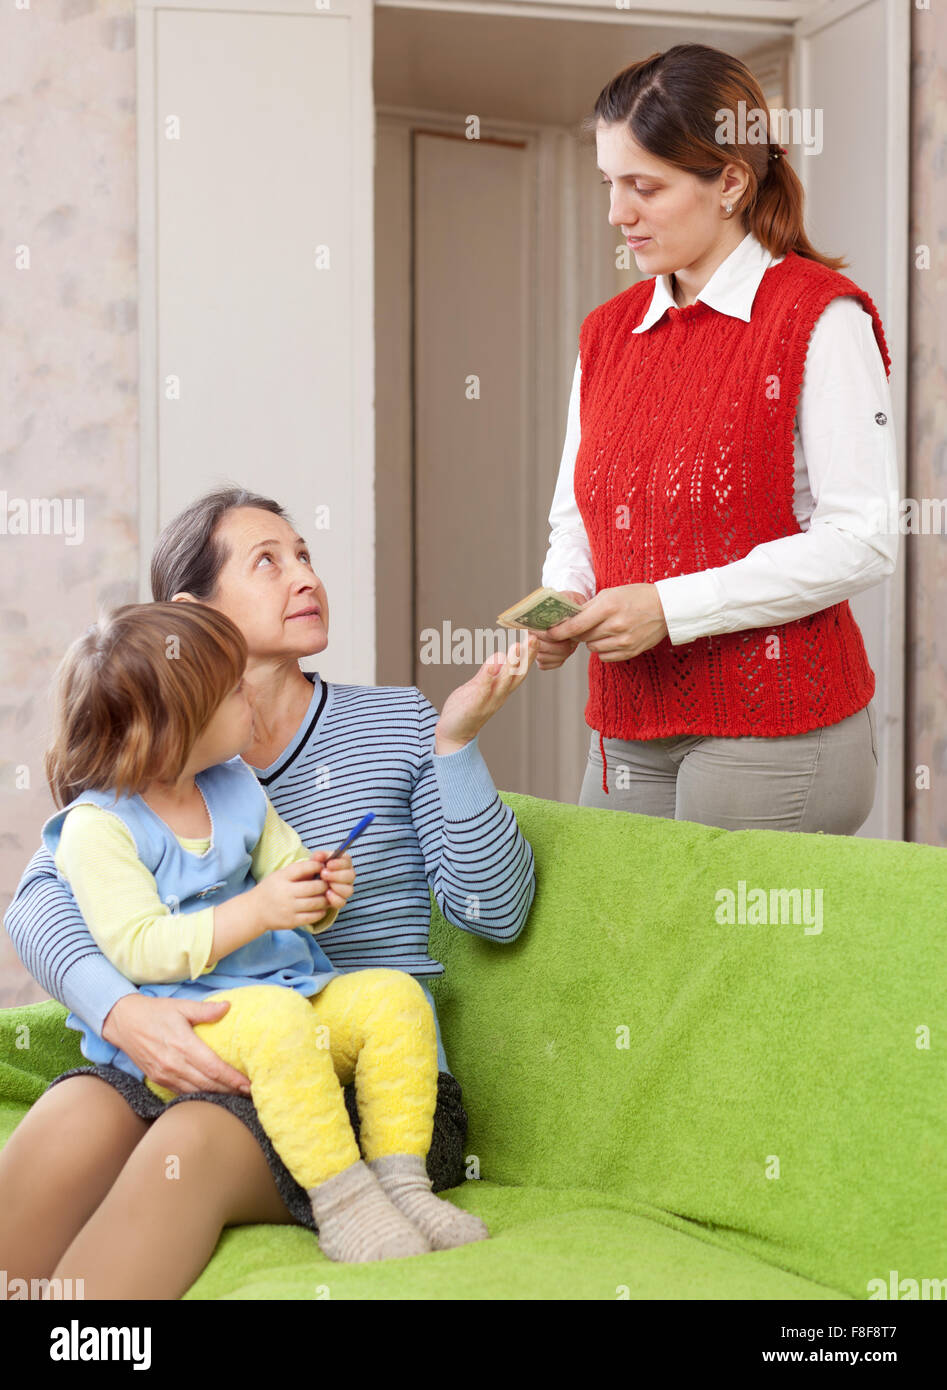 mother leaving baby with nanny at home. Focus on adults Stock Photo